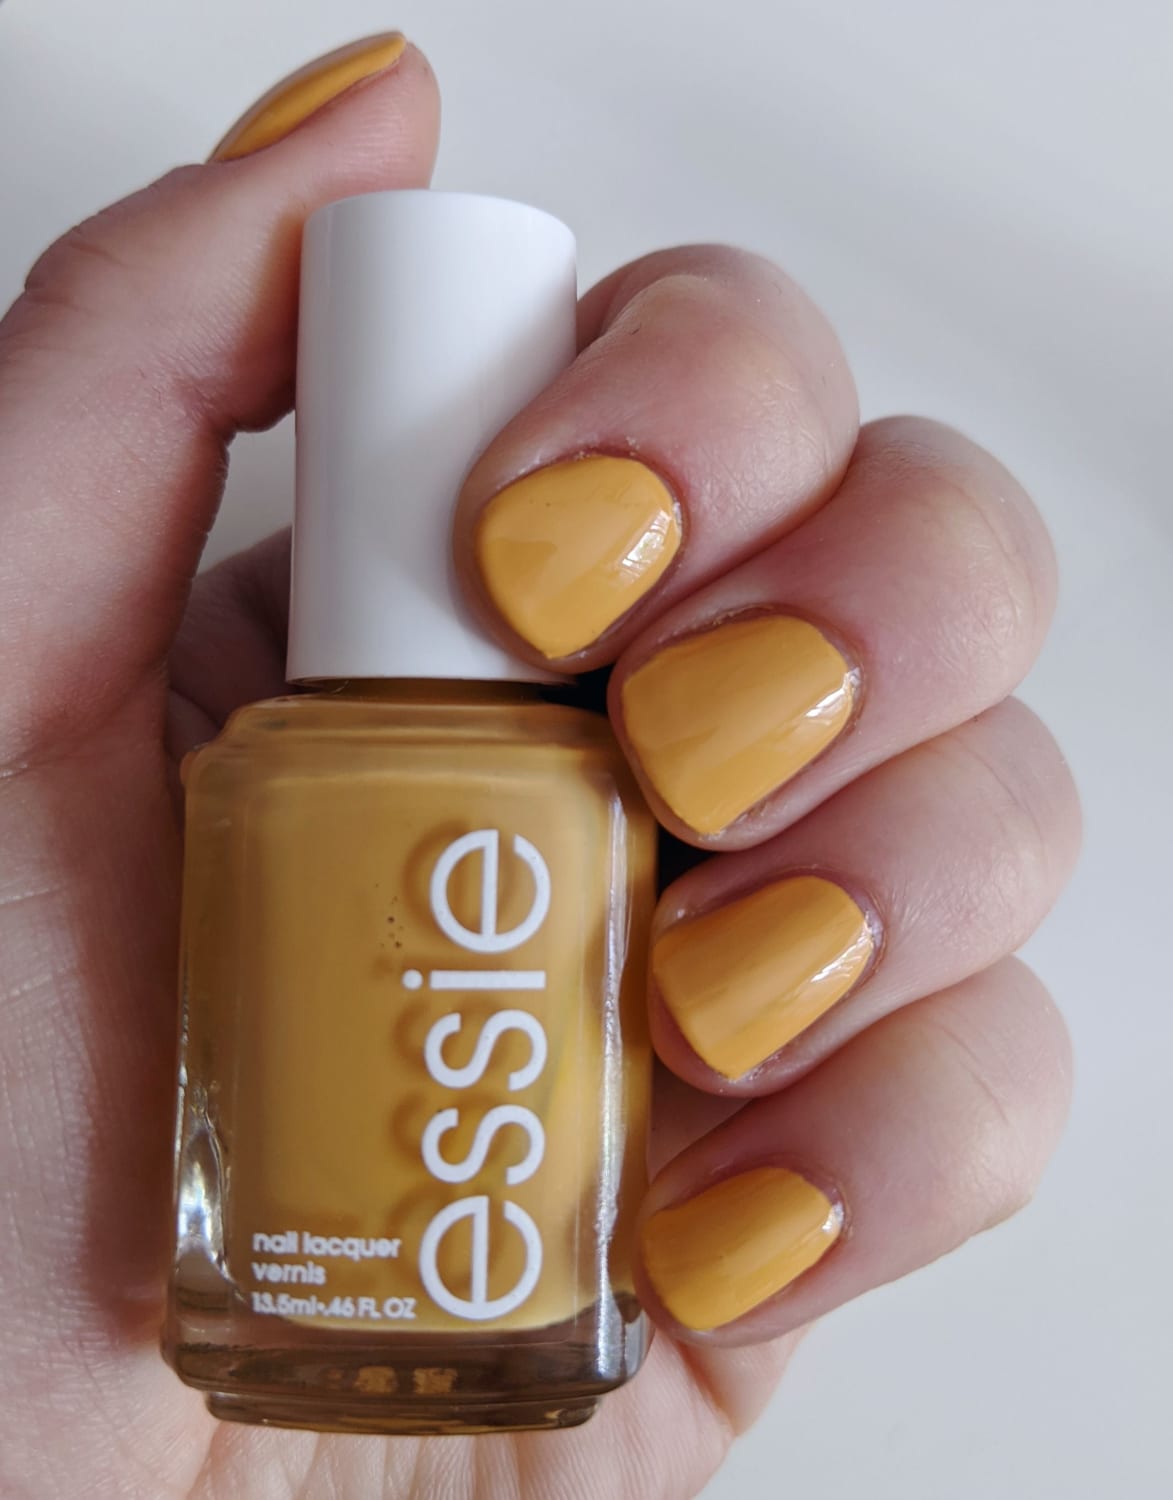 I struggled with the application, but Essie's "You Know the Espadrille" is such a unique yellow!